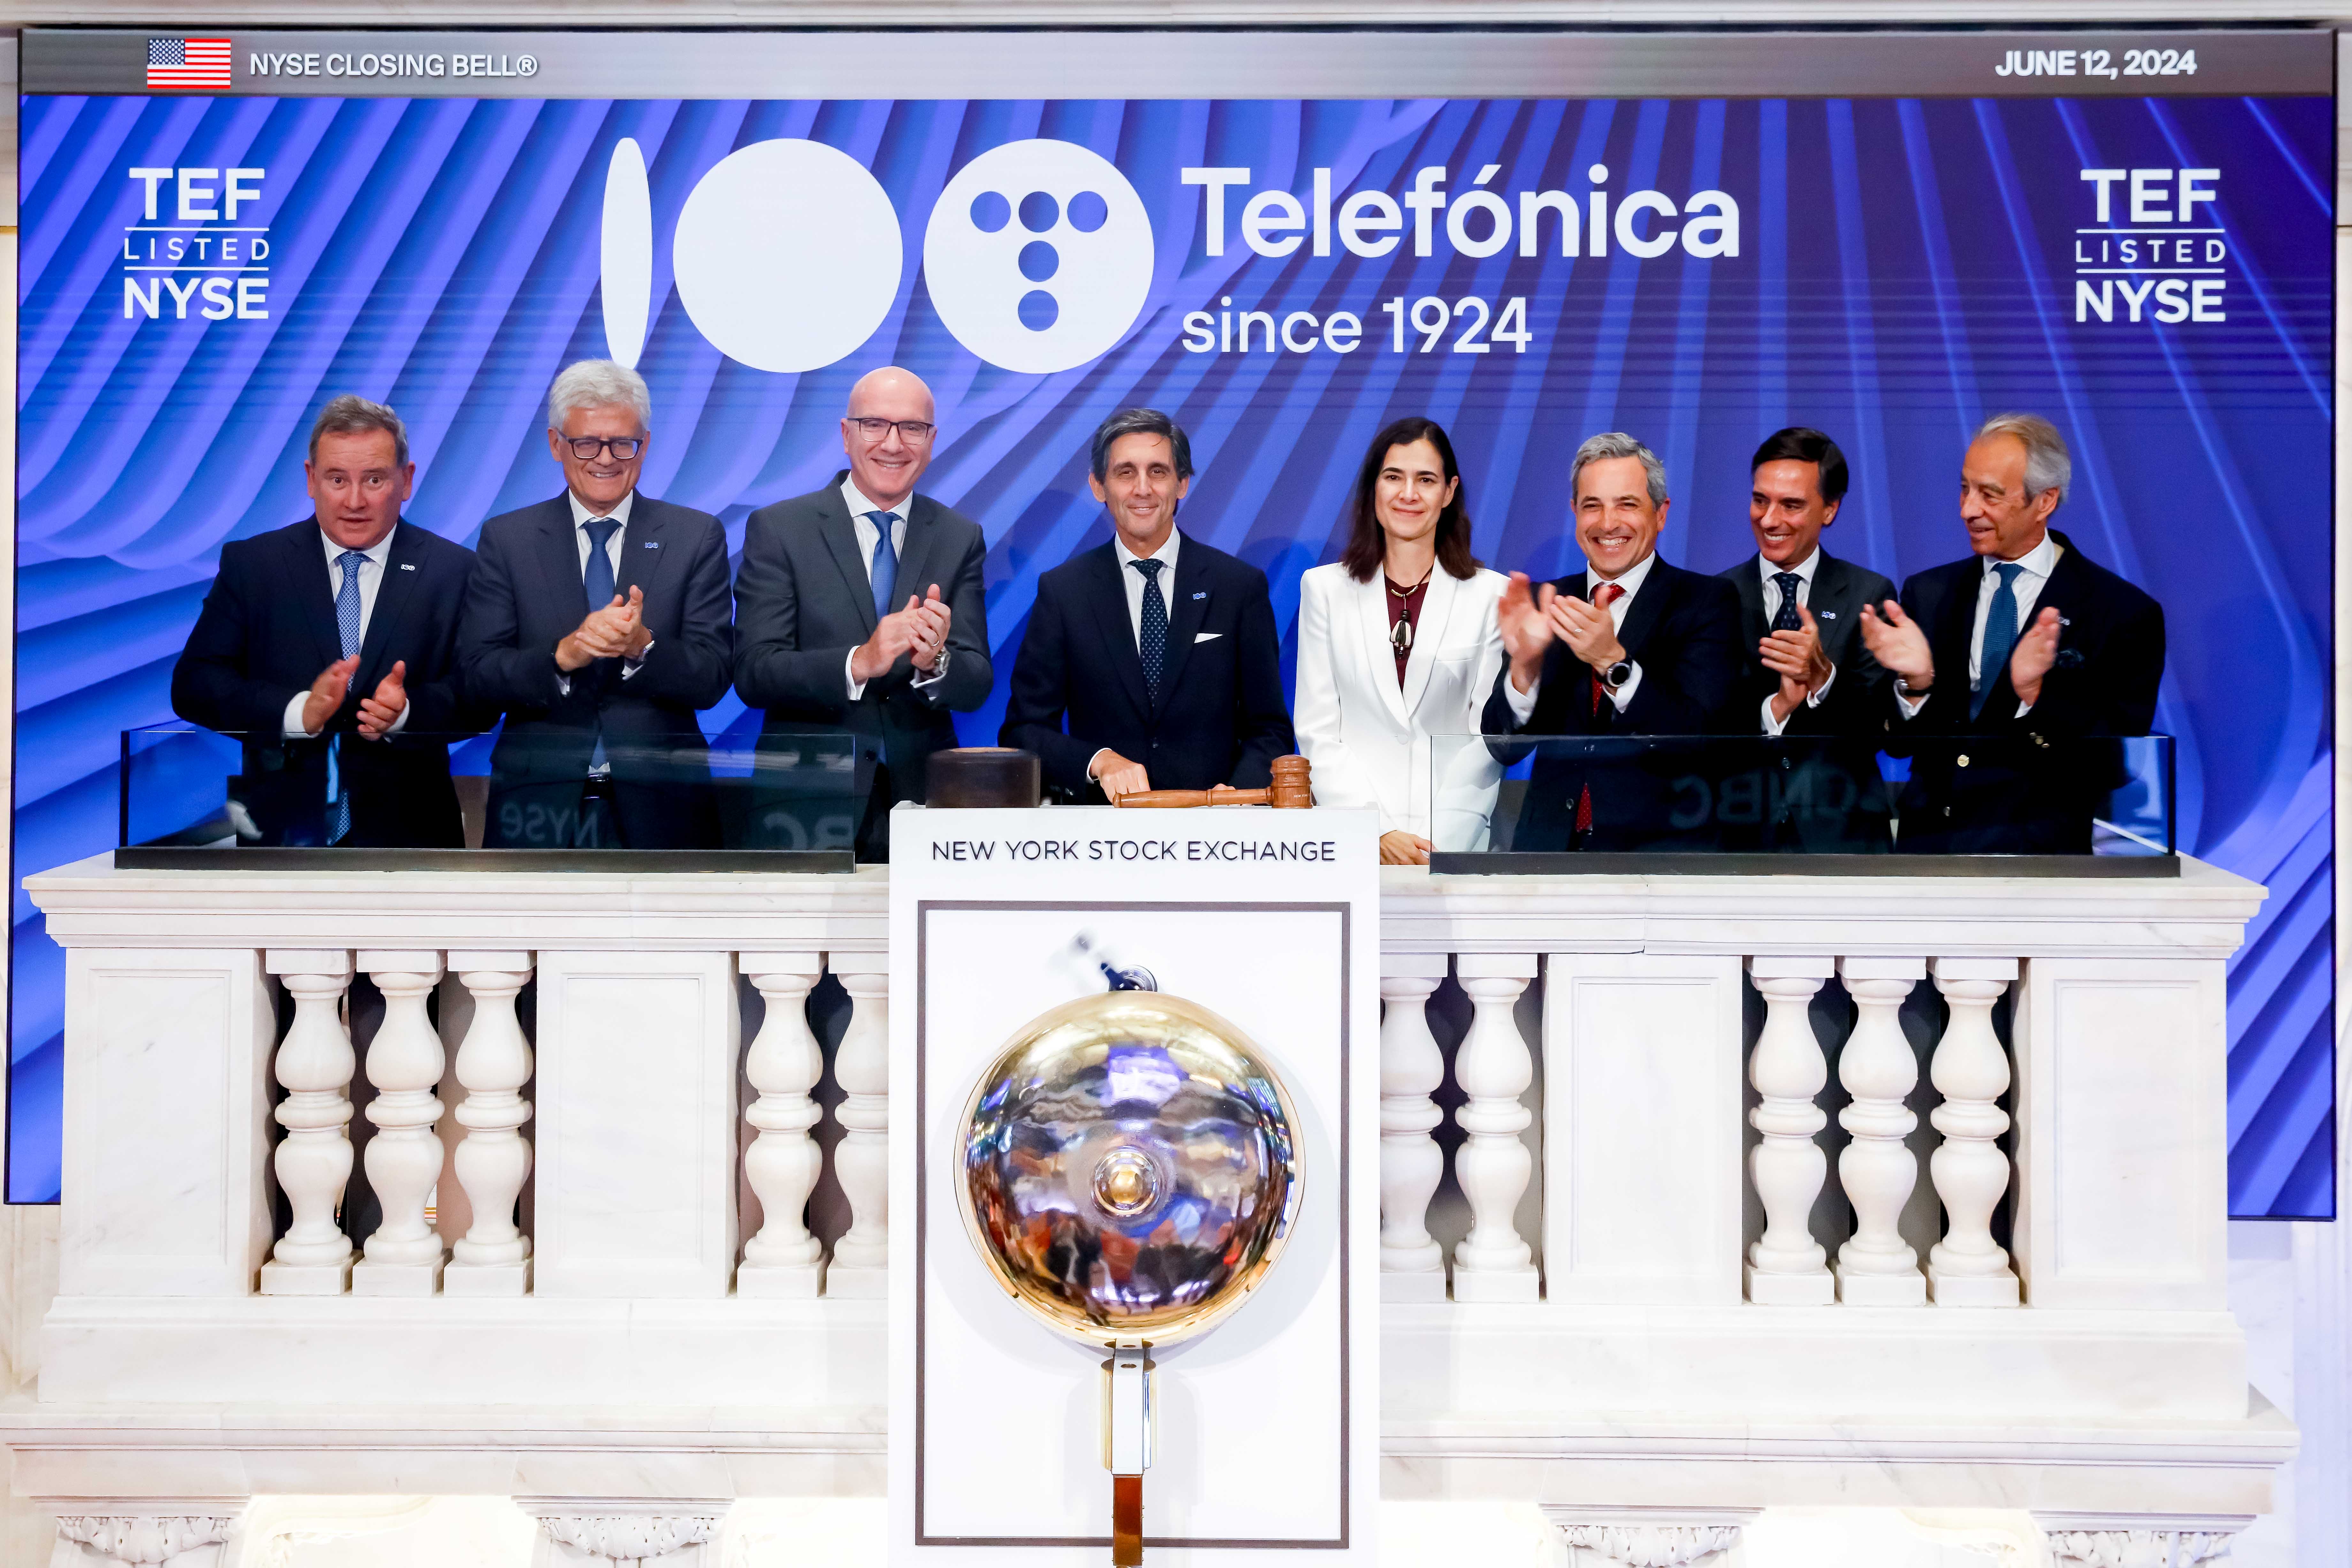 Telefónica S.A. (NYSE: TEF) rings the Closing Bell at the New York Stock Exchange. Photo: NYSE 